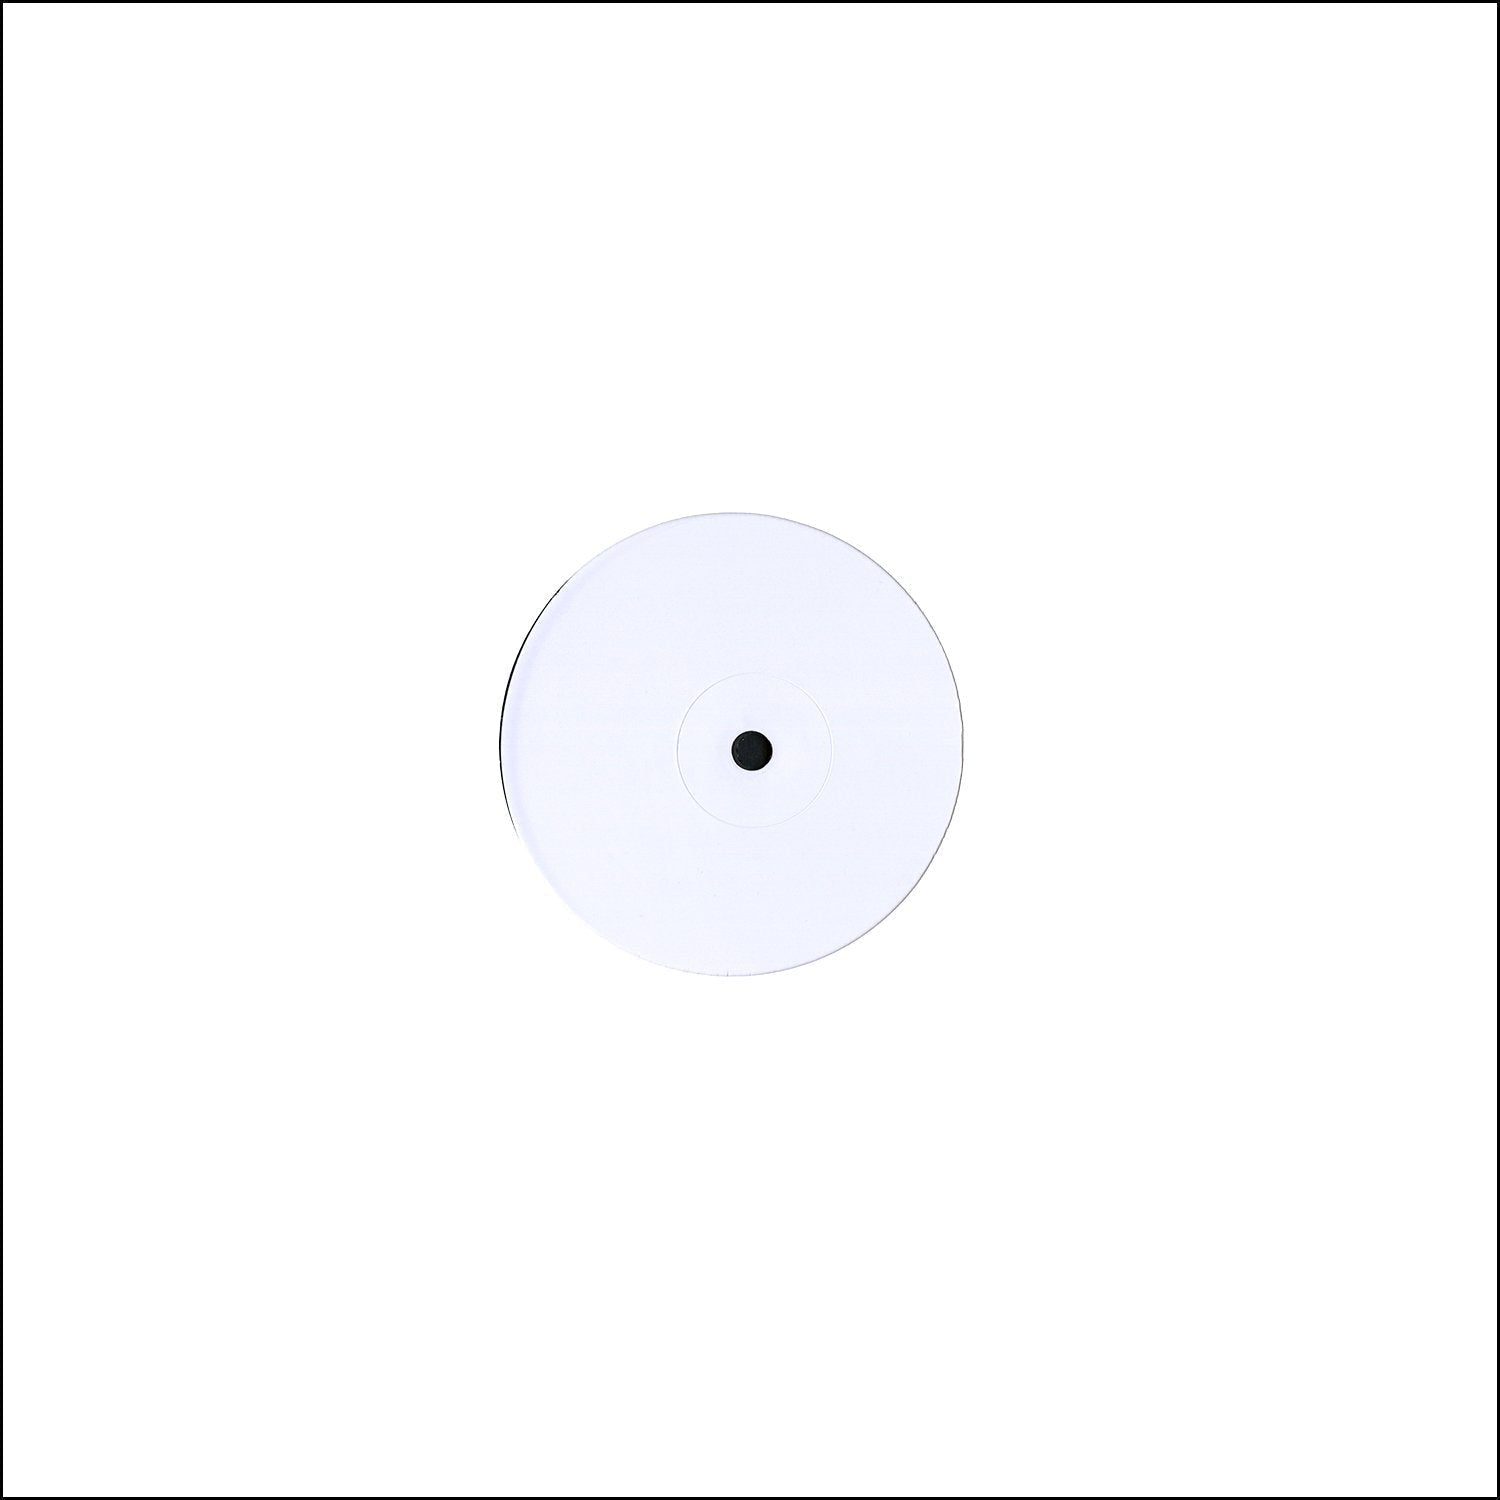 Harry Dean Stanton: Partly Fiction [Test Pressing]